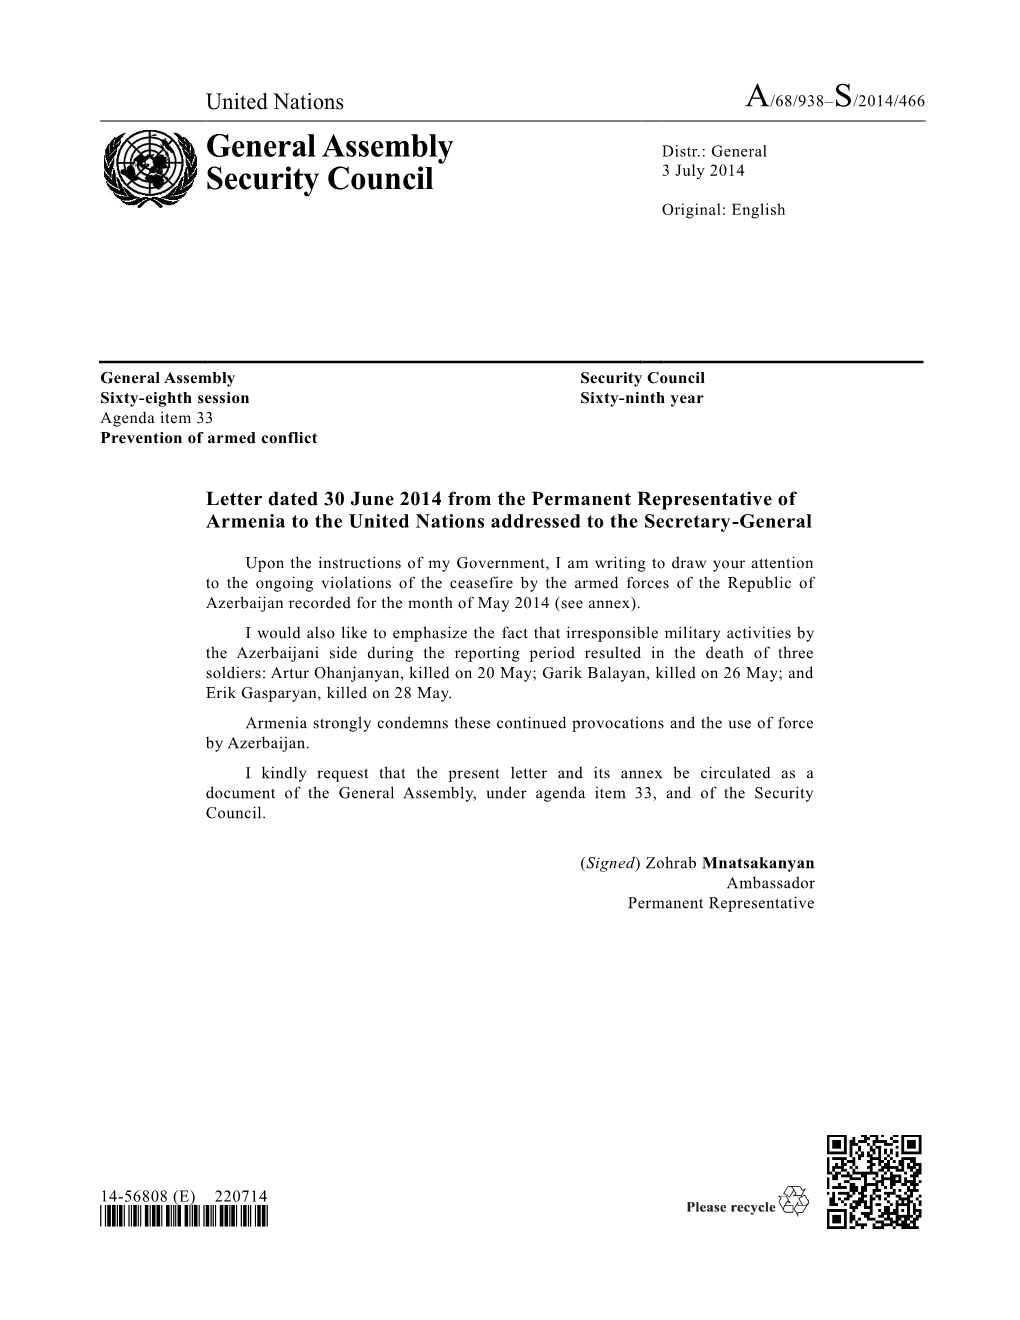 General Assembly Security Council Sixty-Eighth Session Sixty-Ninth Year Agenda Item 33 Prevention of Armed Conflict